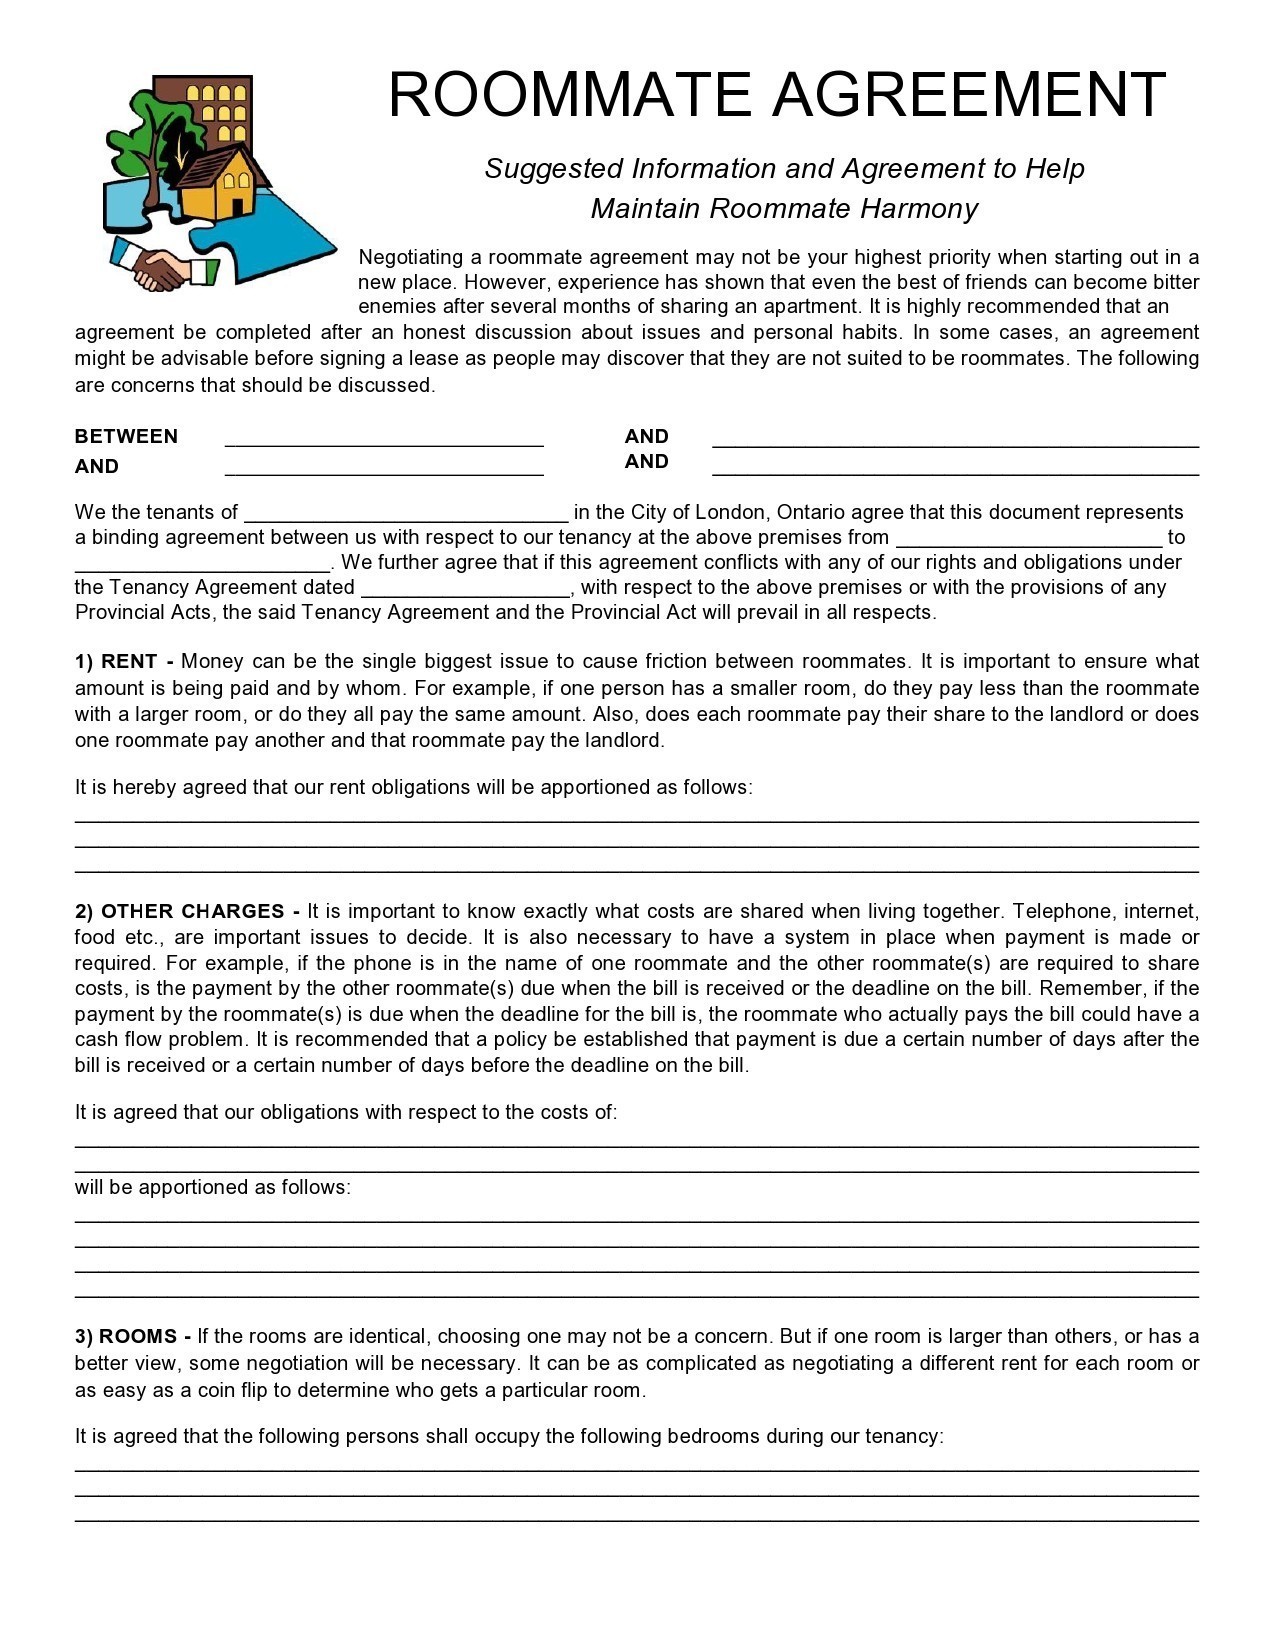 Free roommate agreement template 09